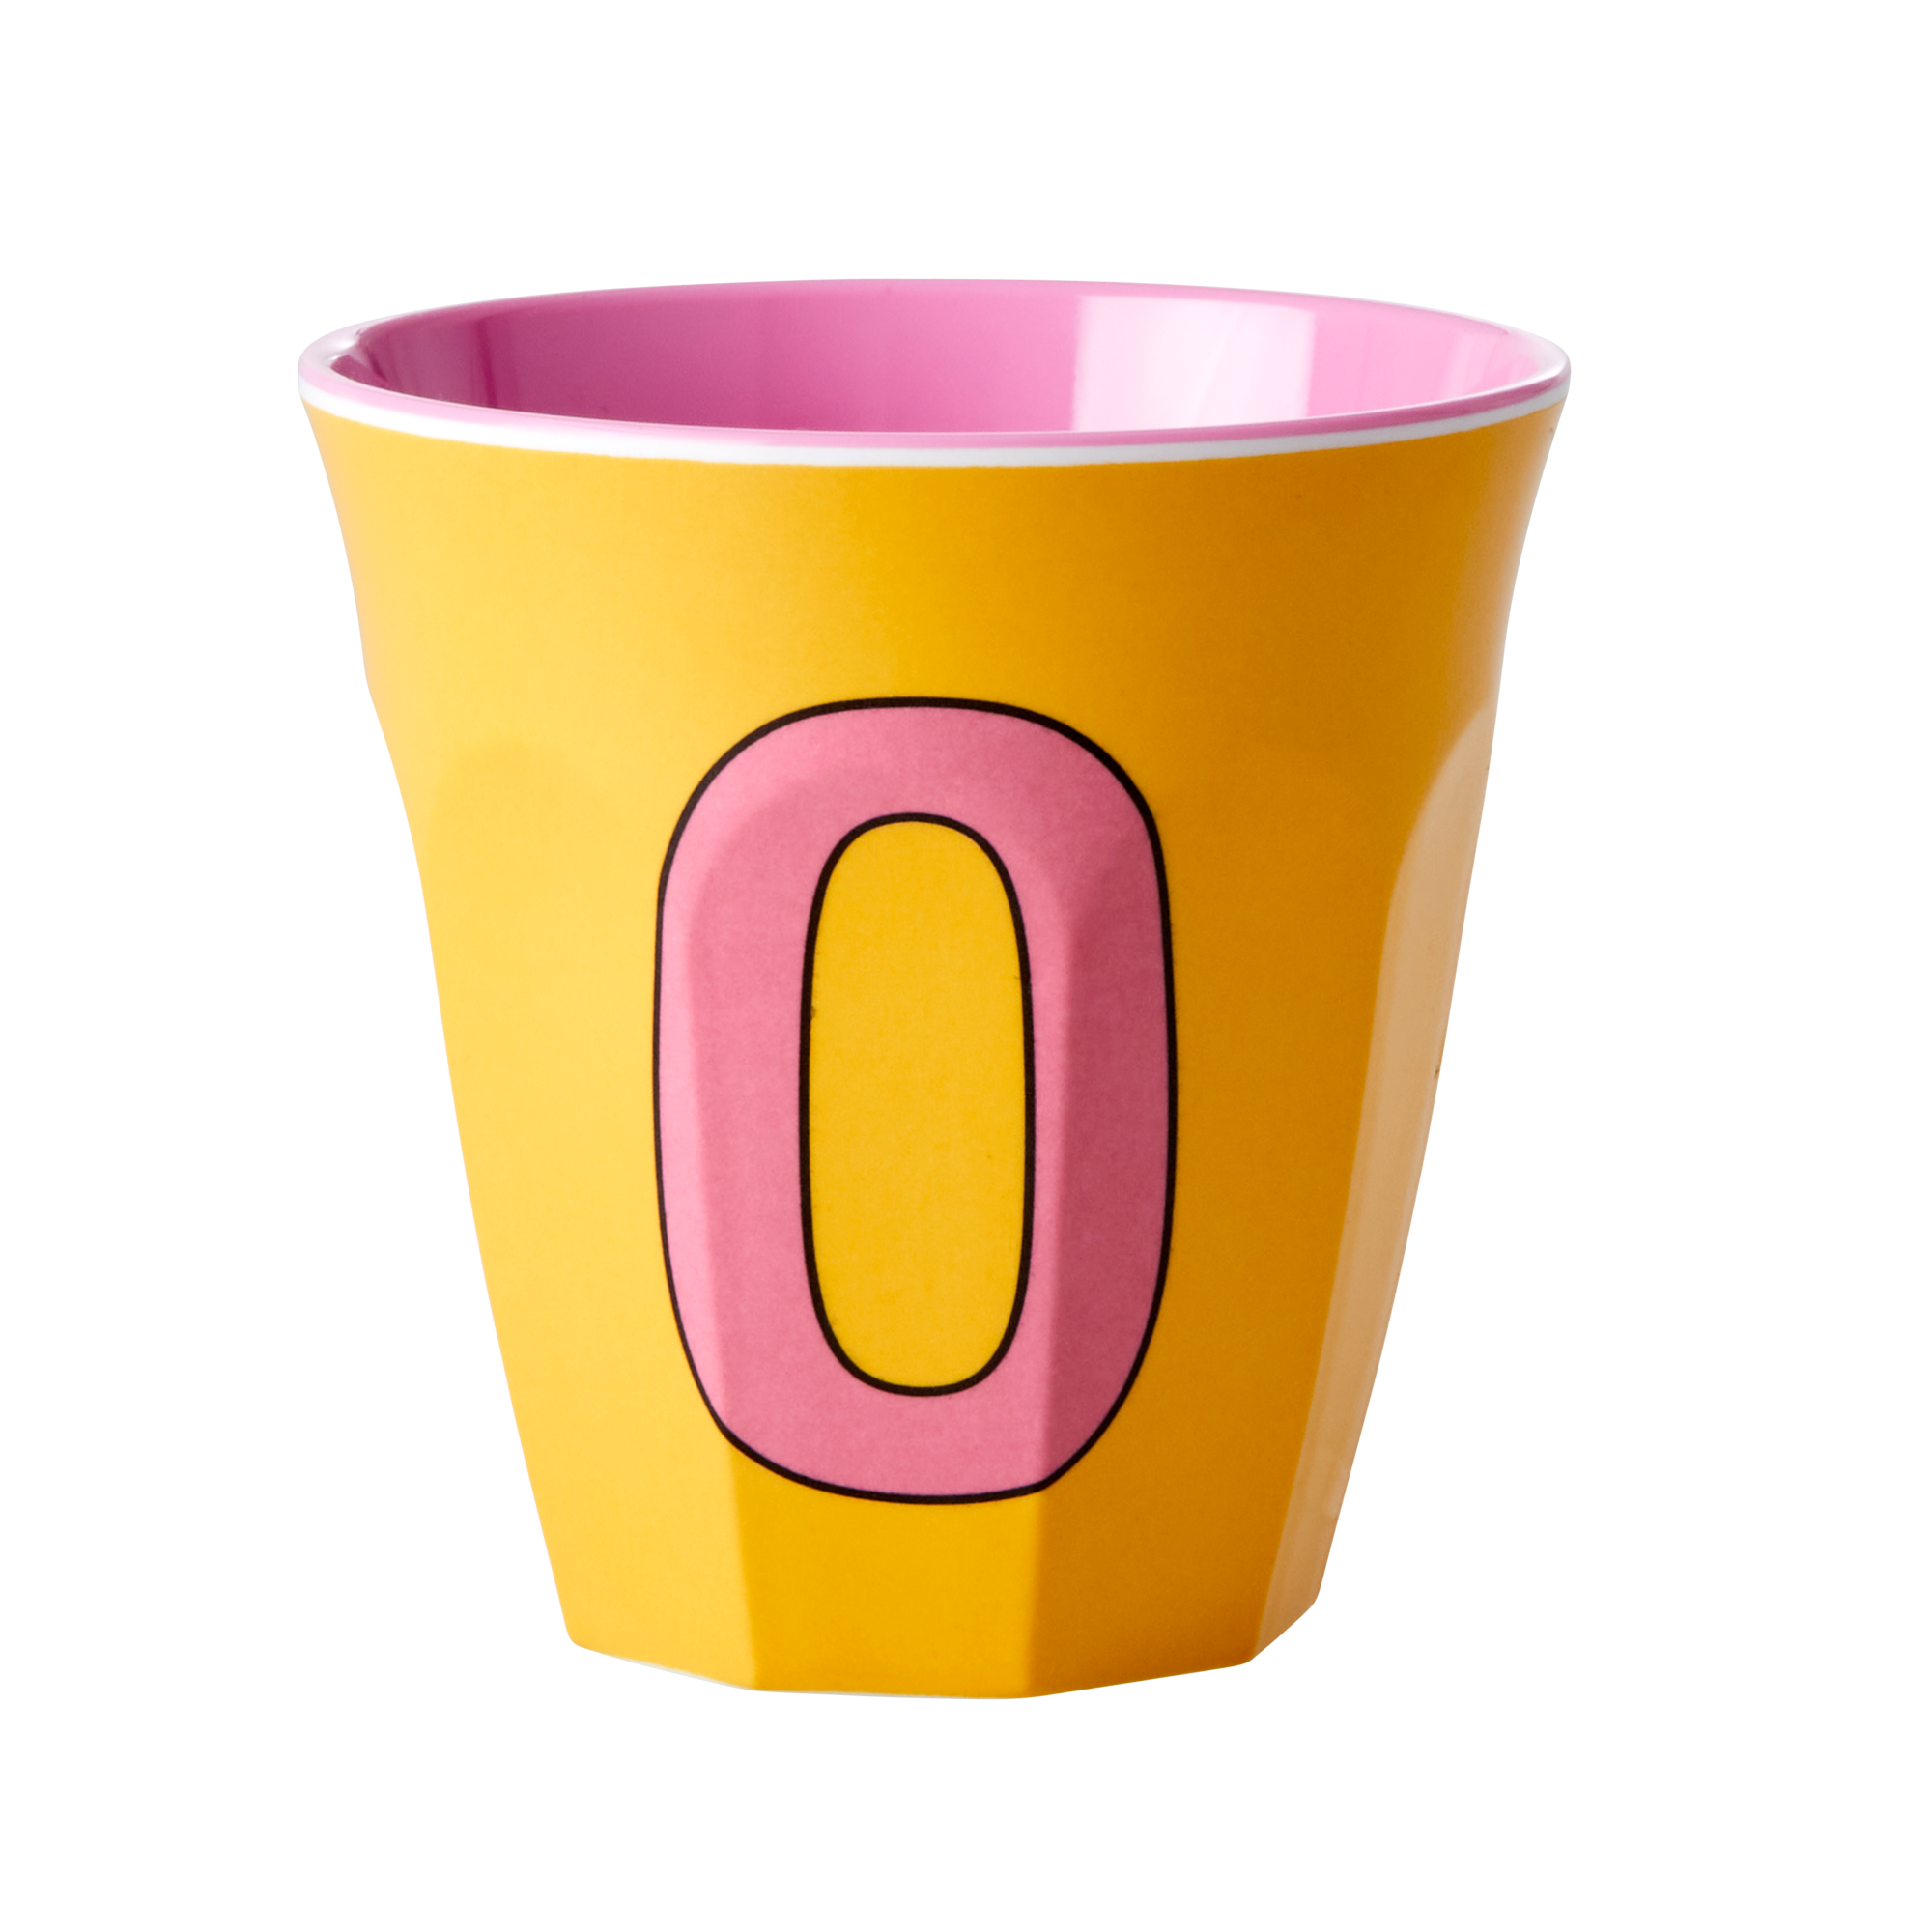 Melamine cup by Rice by Rice in the colors yellow, pink, and orange with the letter "O"